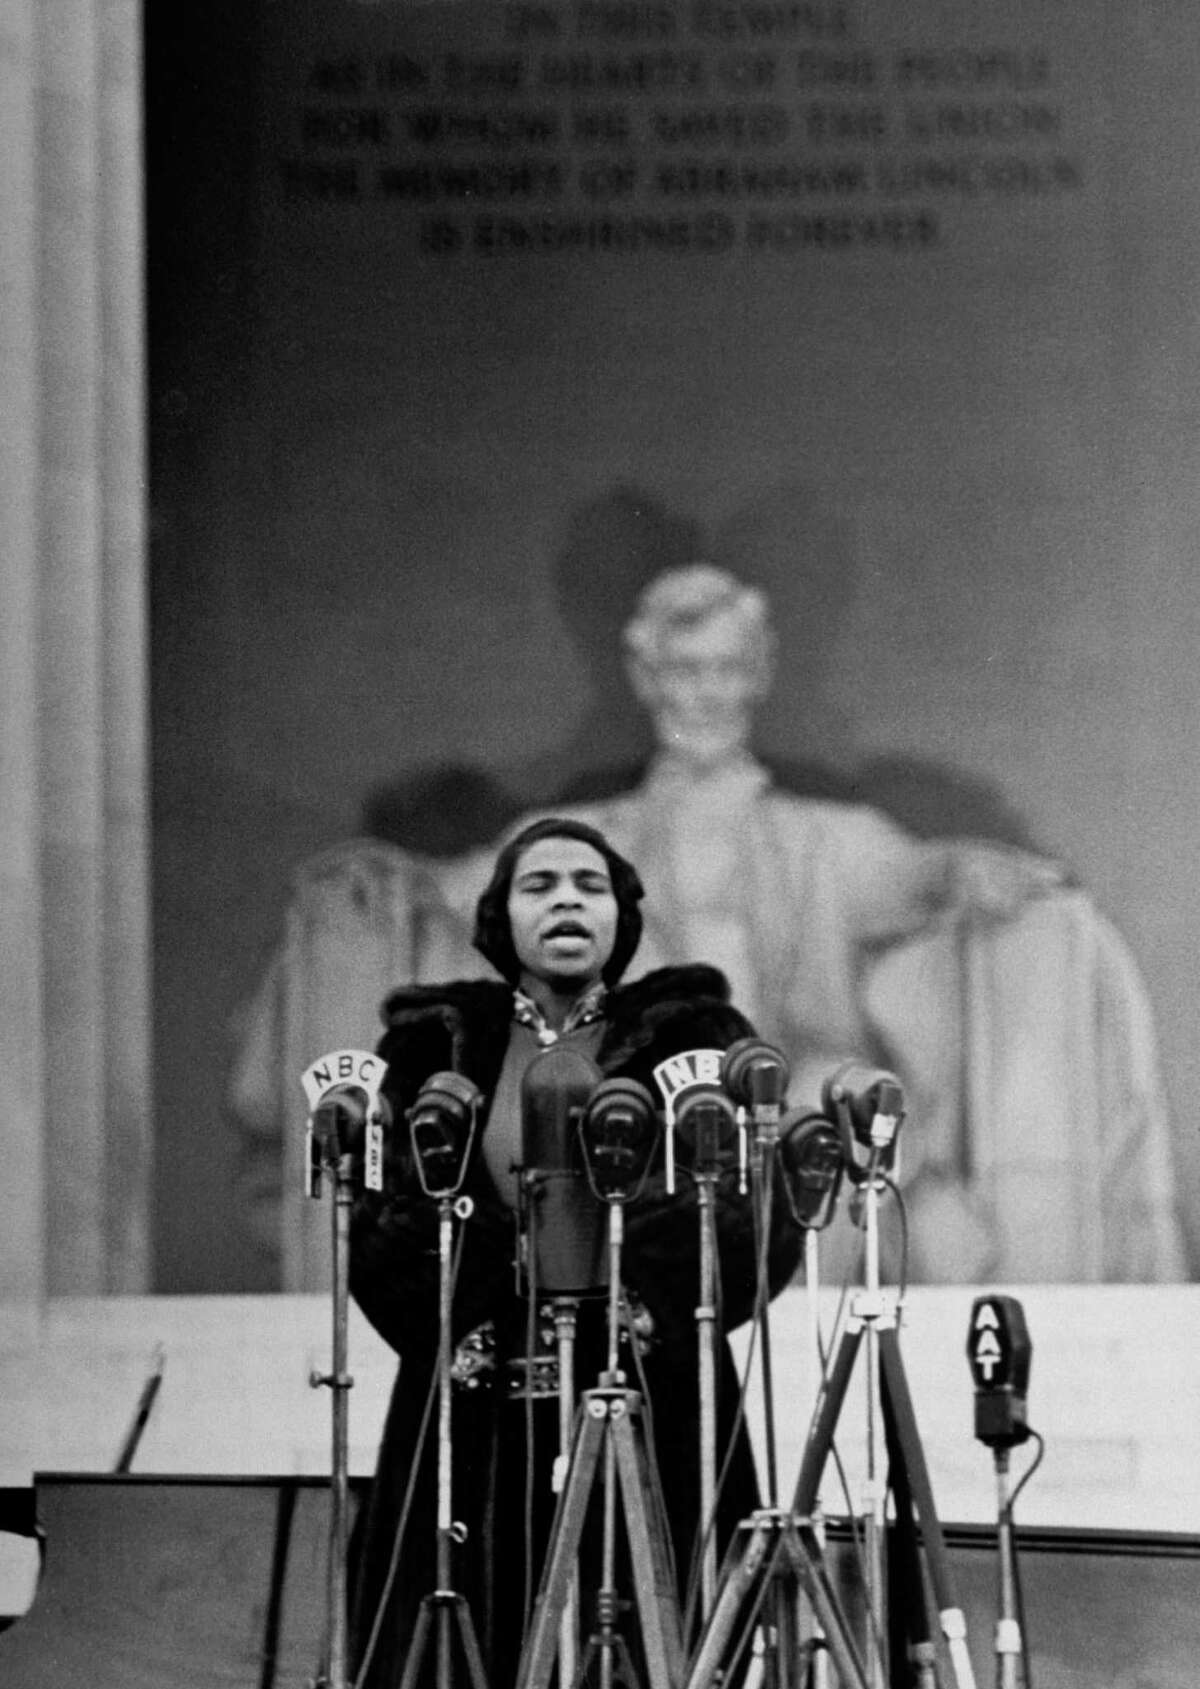 Singer Marian Anderson, denied use of a DAR (Daughters of the American Revolution) hall because of her race, gives an Easter concert at the Lincoln Memorial.